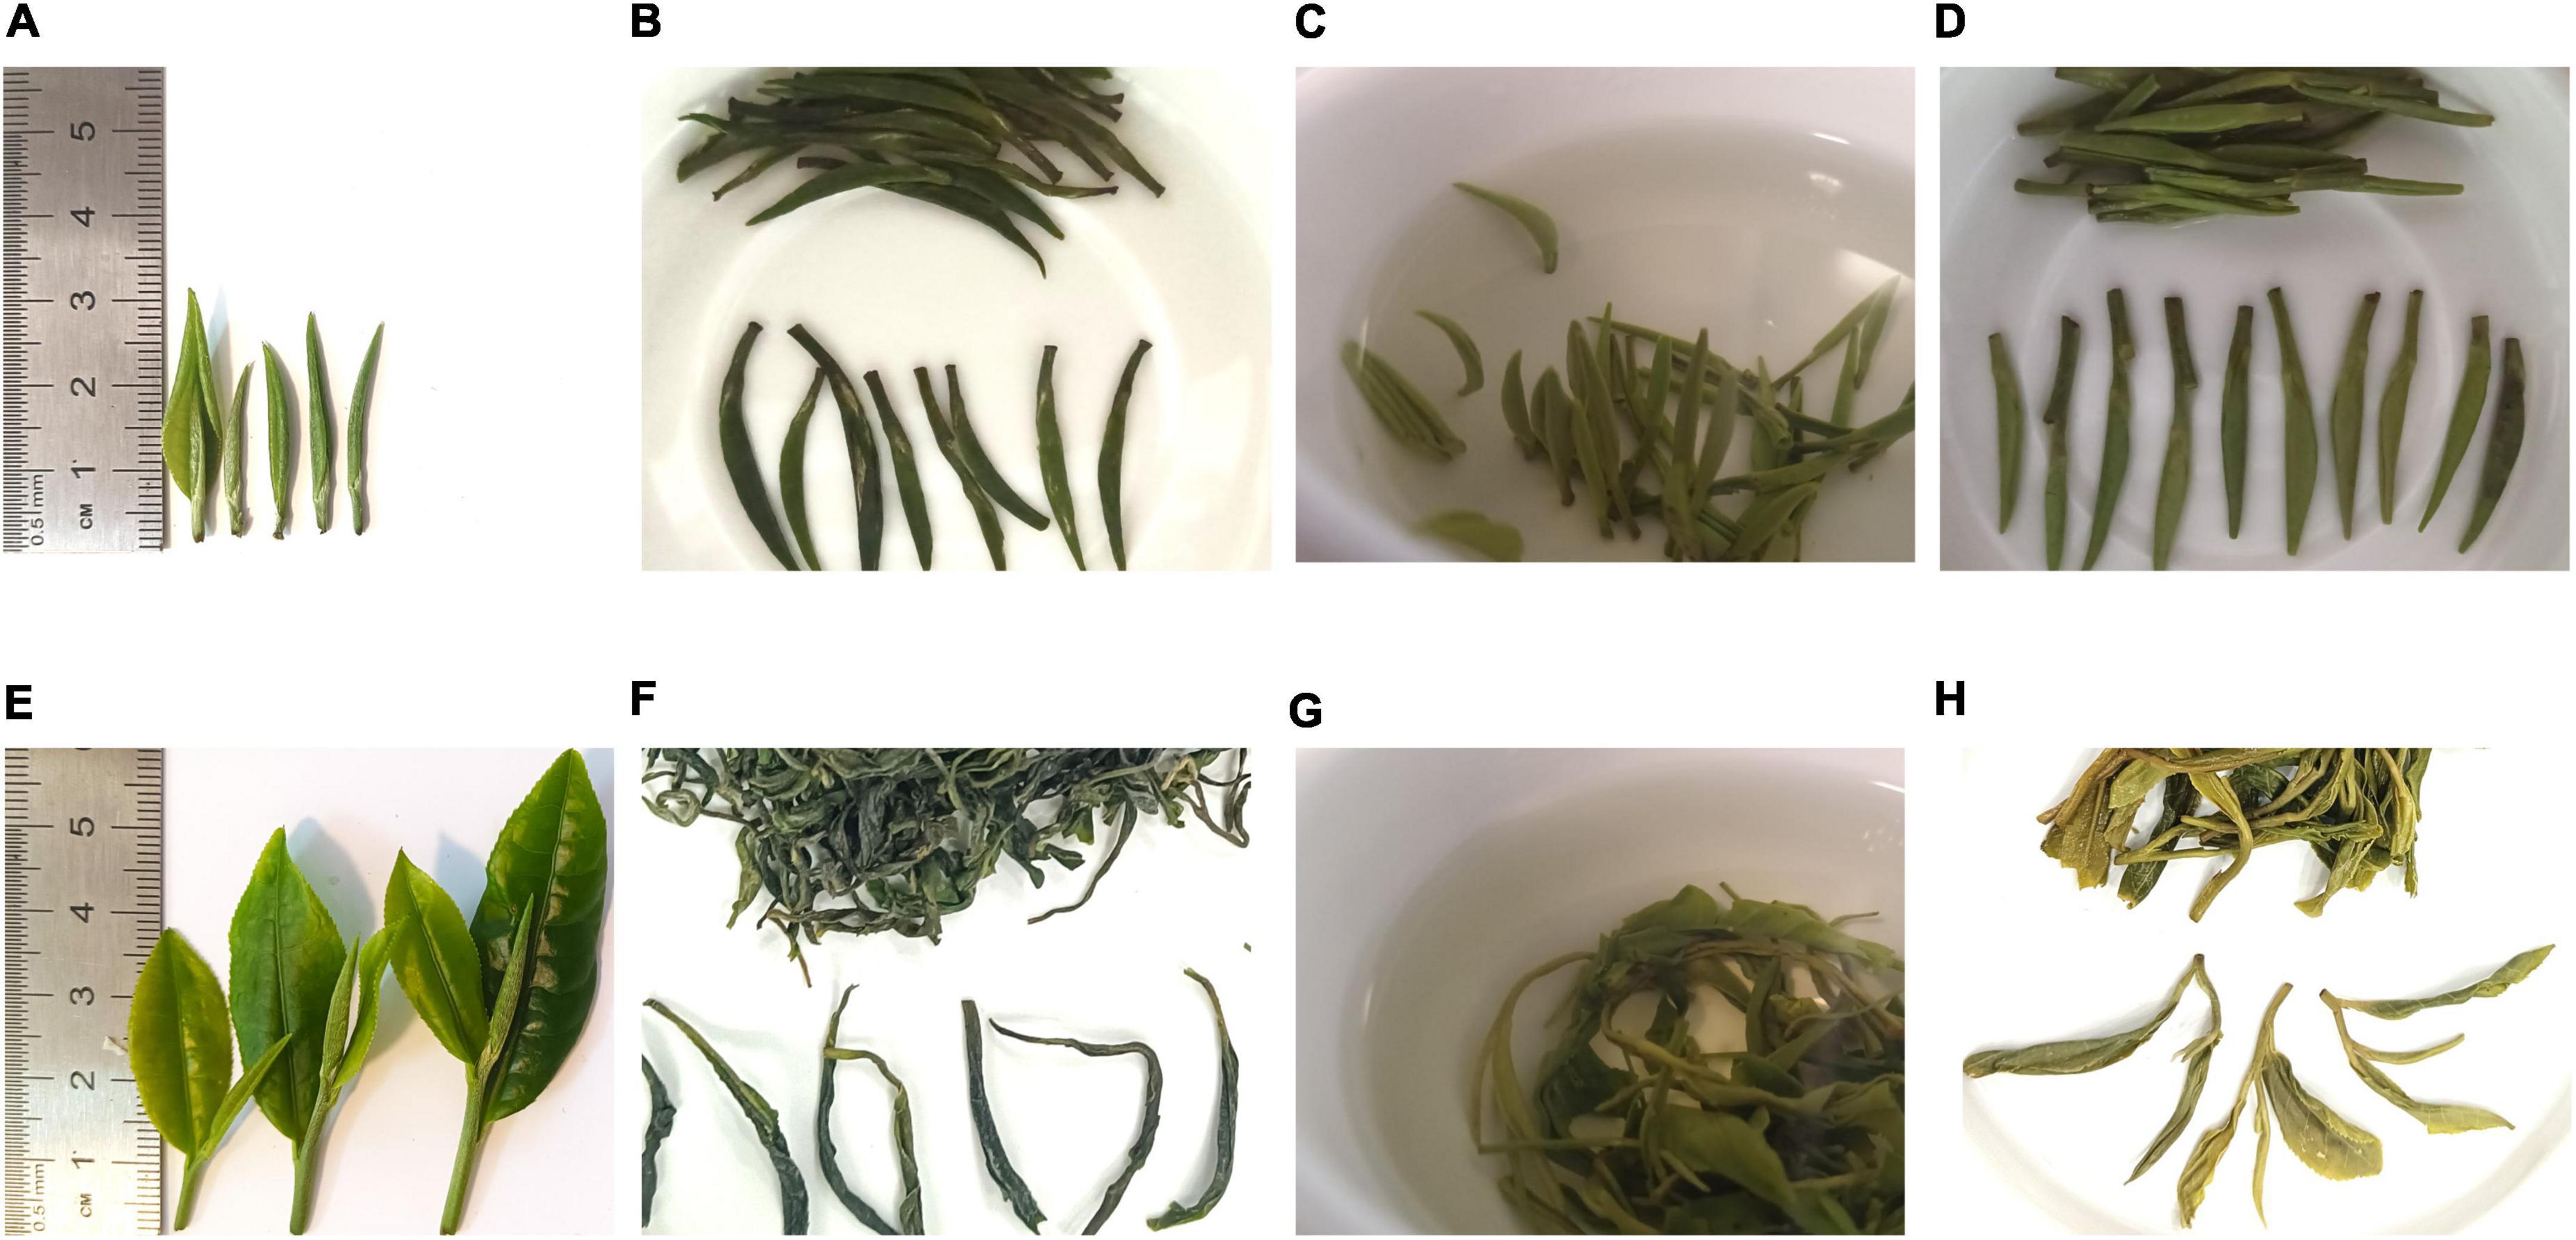 Screening Method for 30 Pesticides in Green Tea  - Thermo Fisher